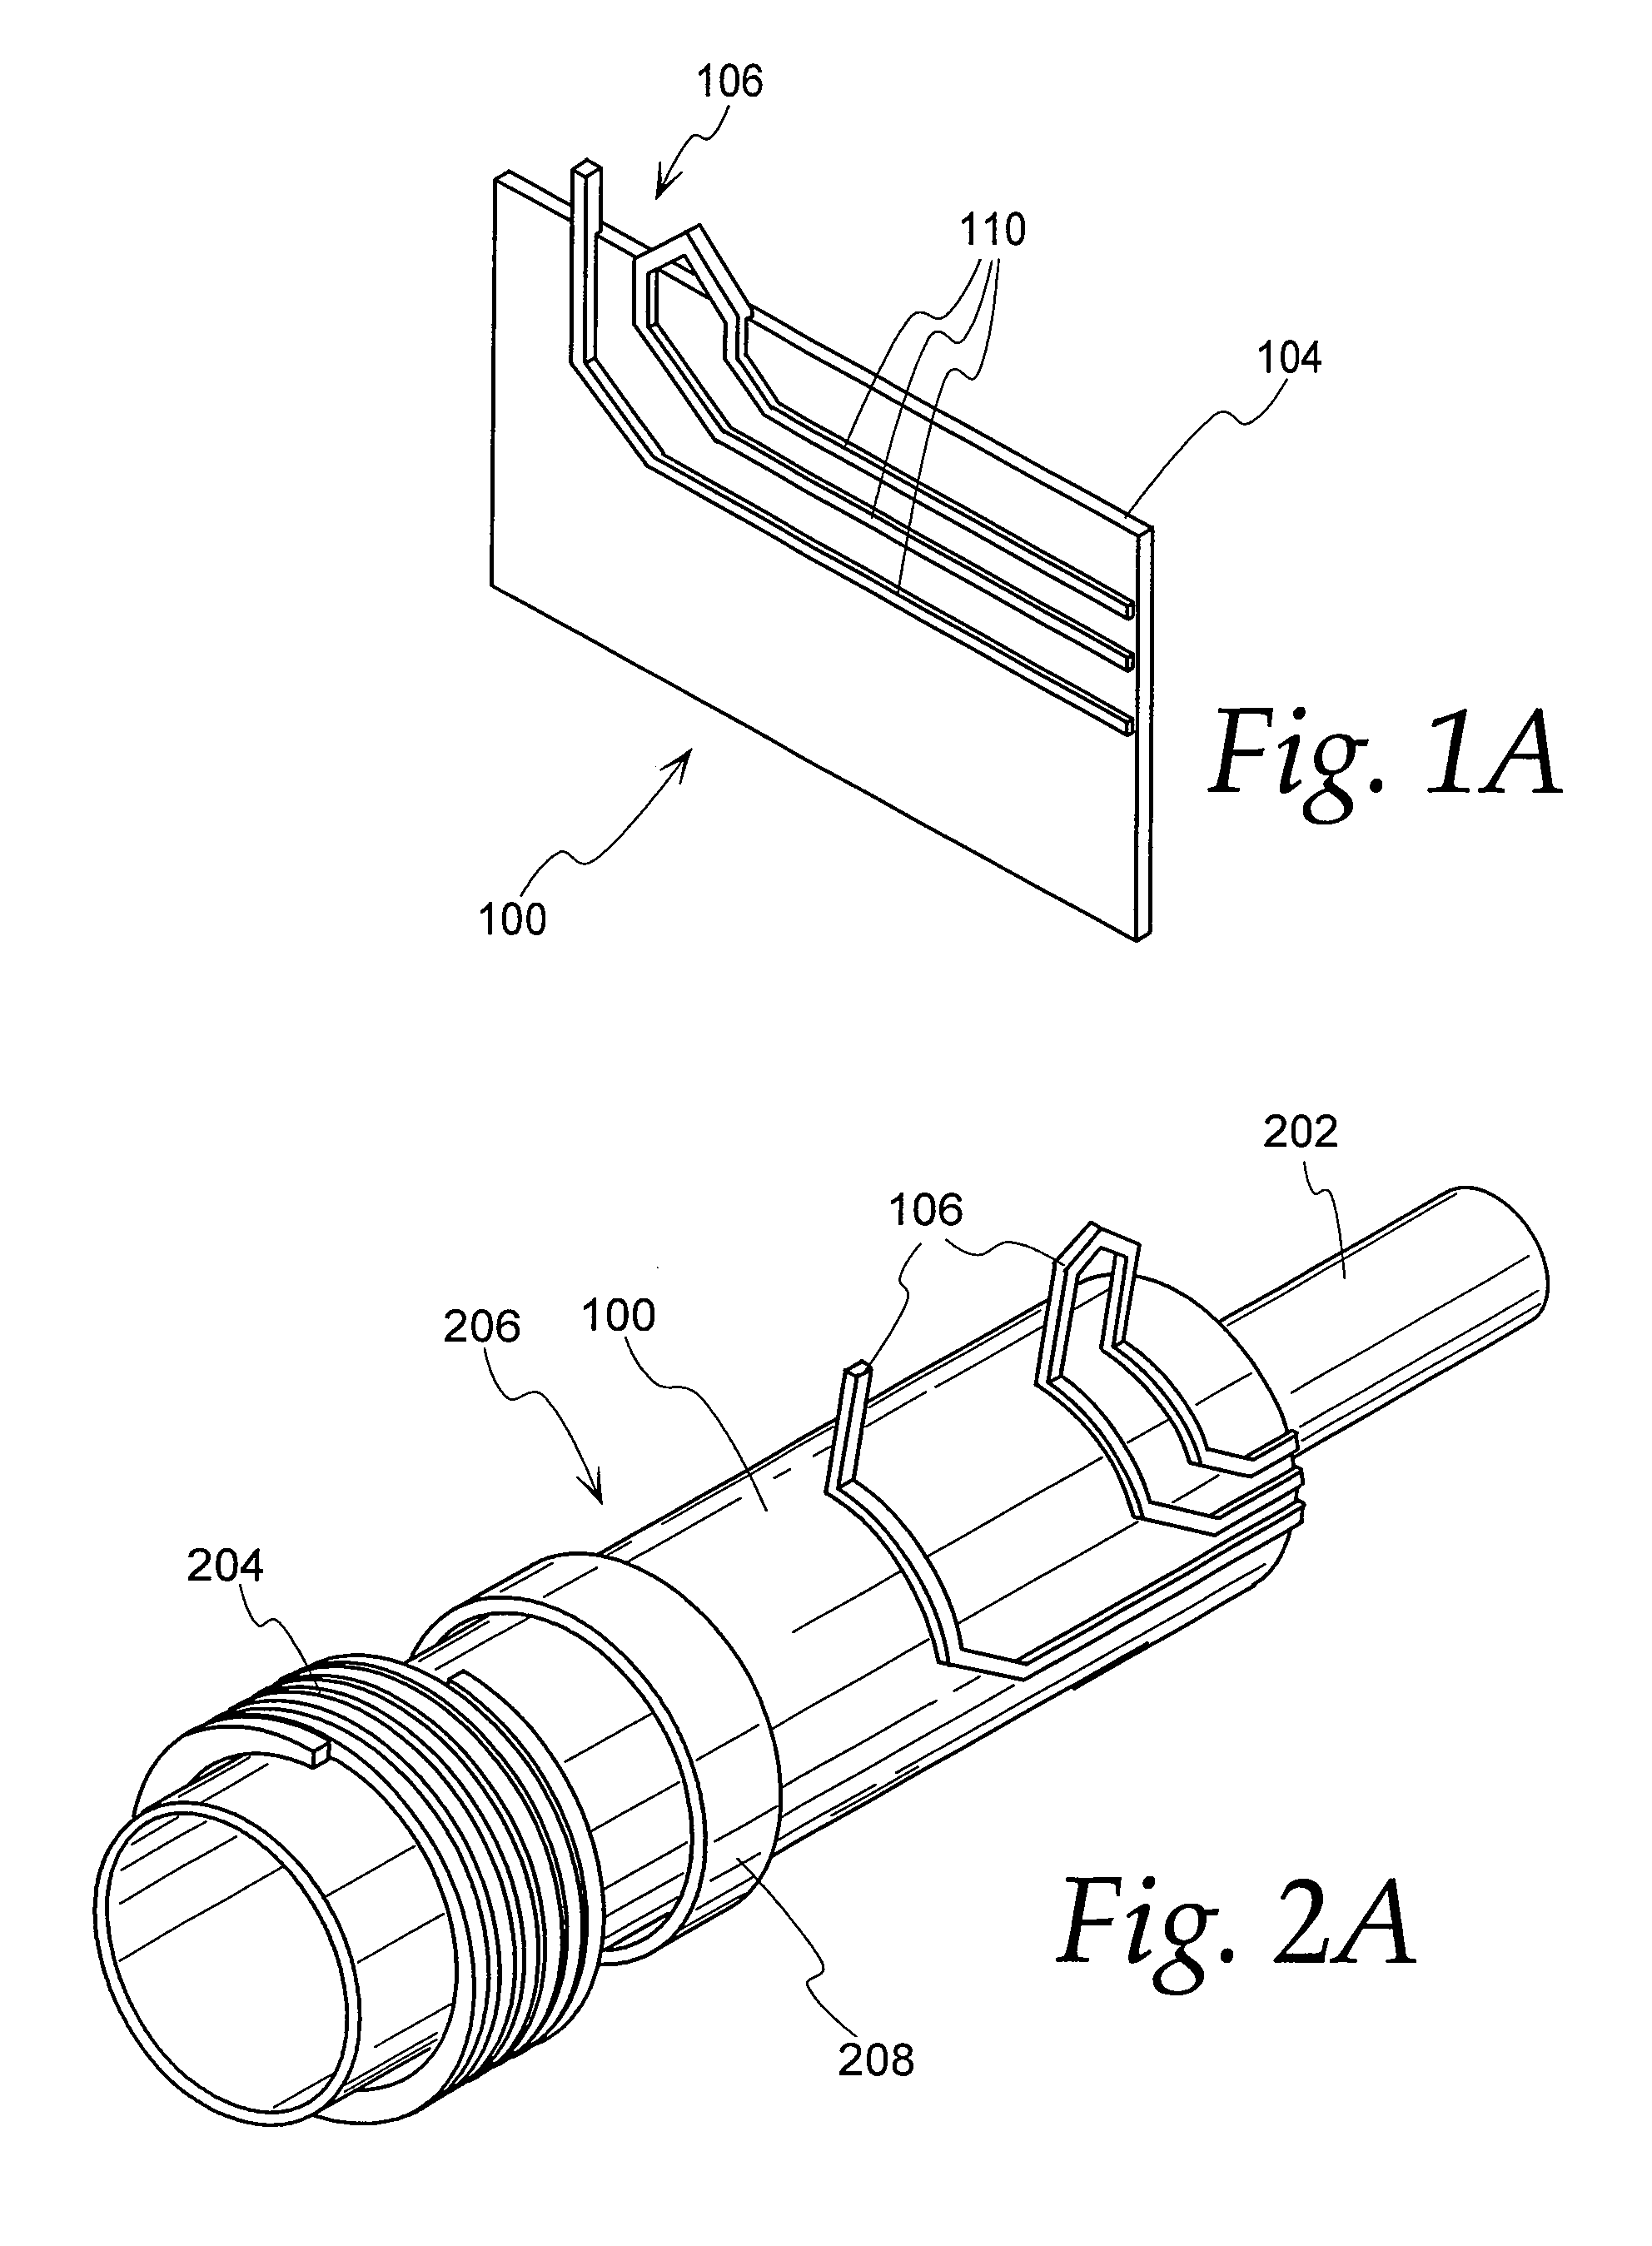 System and Method for Performing Ablation and Other Medical Procedures Using An Electrode Array with Flexible Circuit